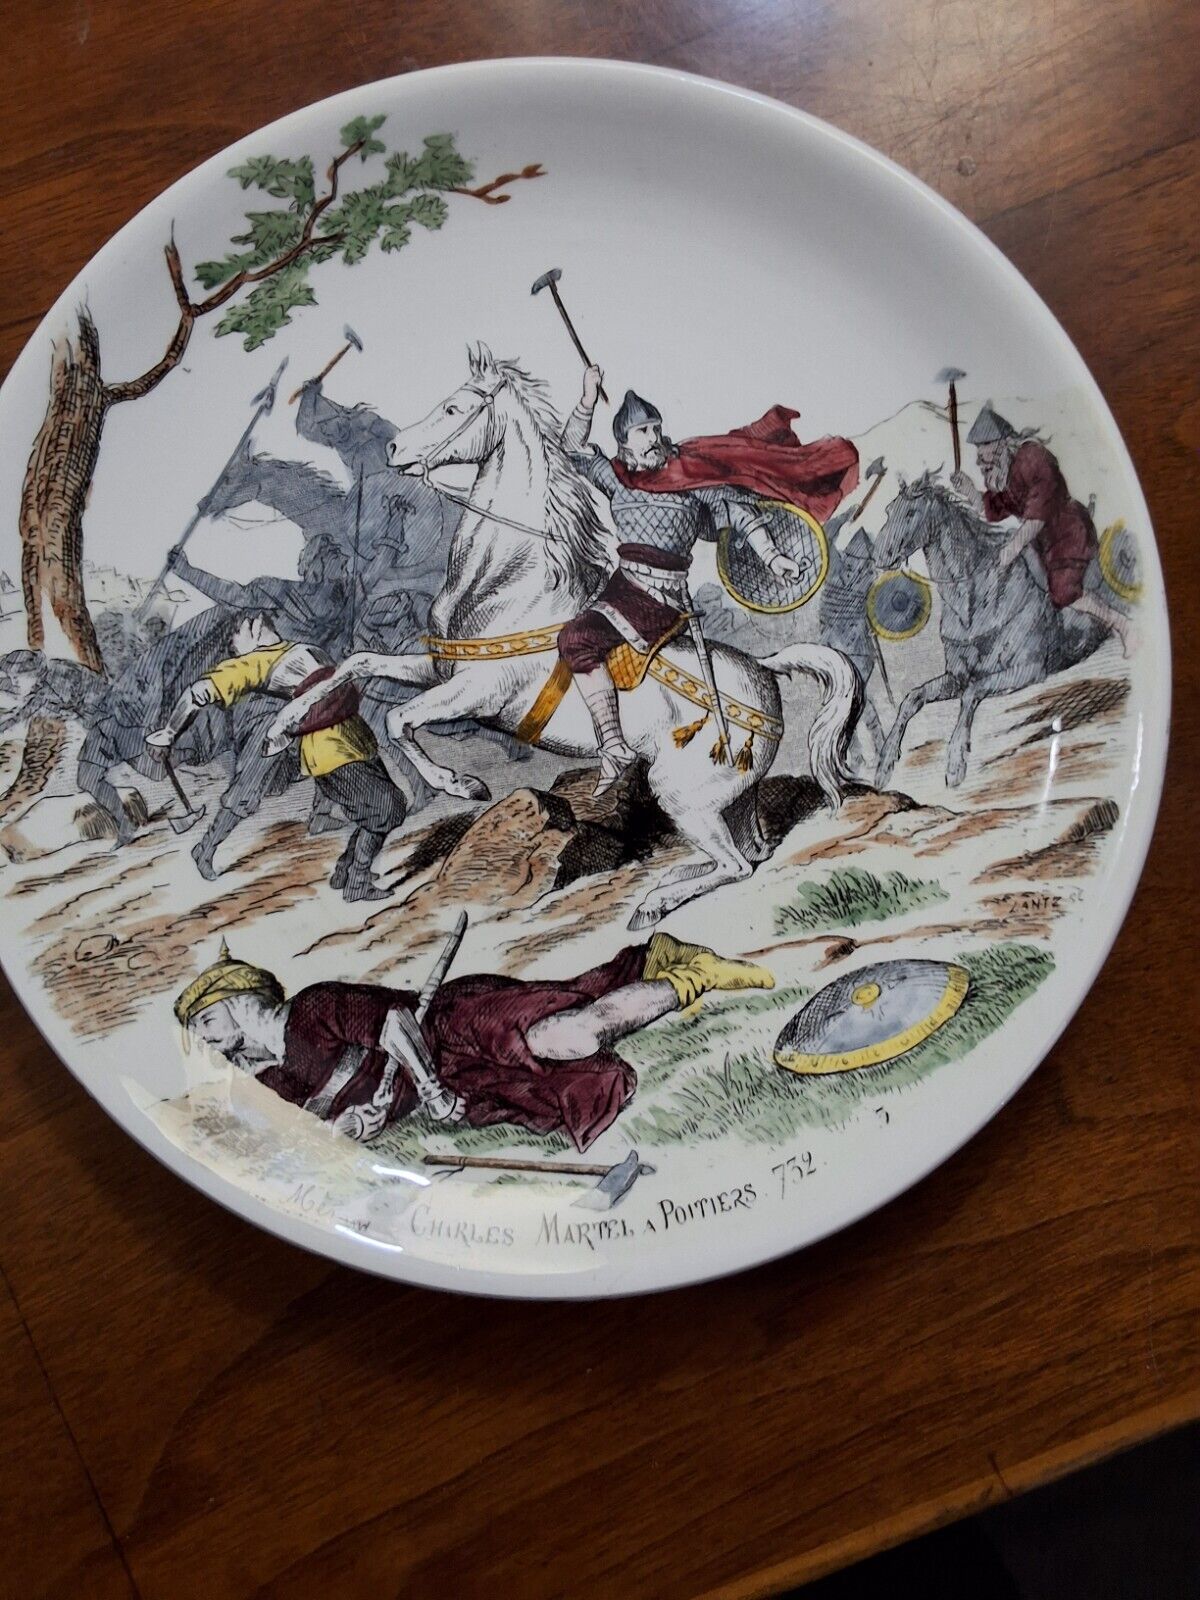 Old French History Military Plate, Charles Martel and the Battle of Poitiers 732